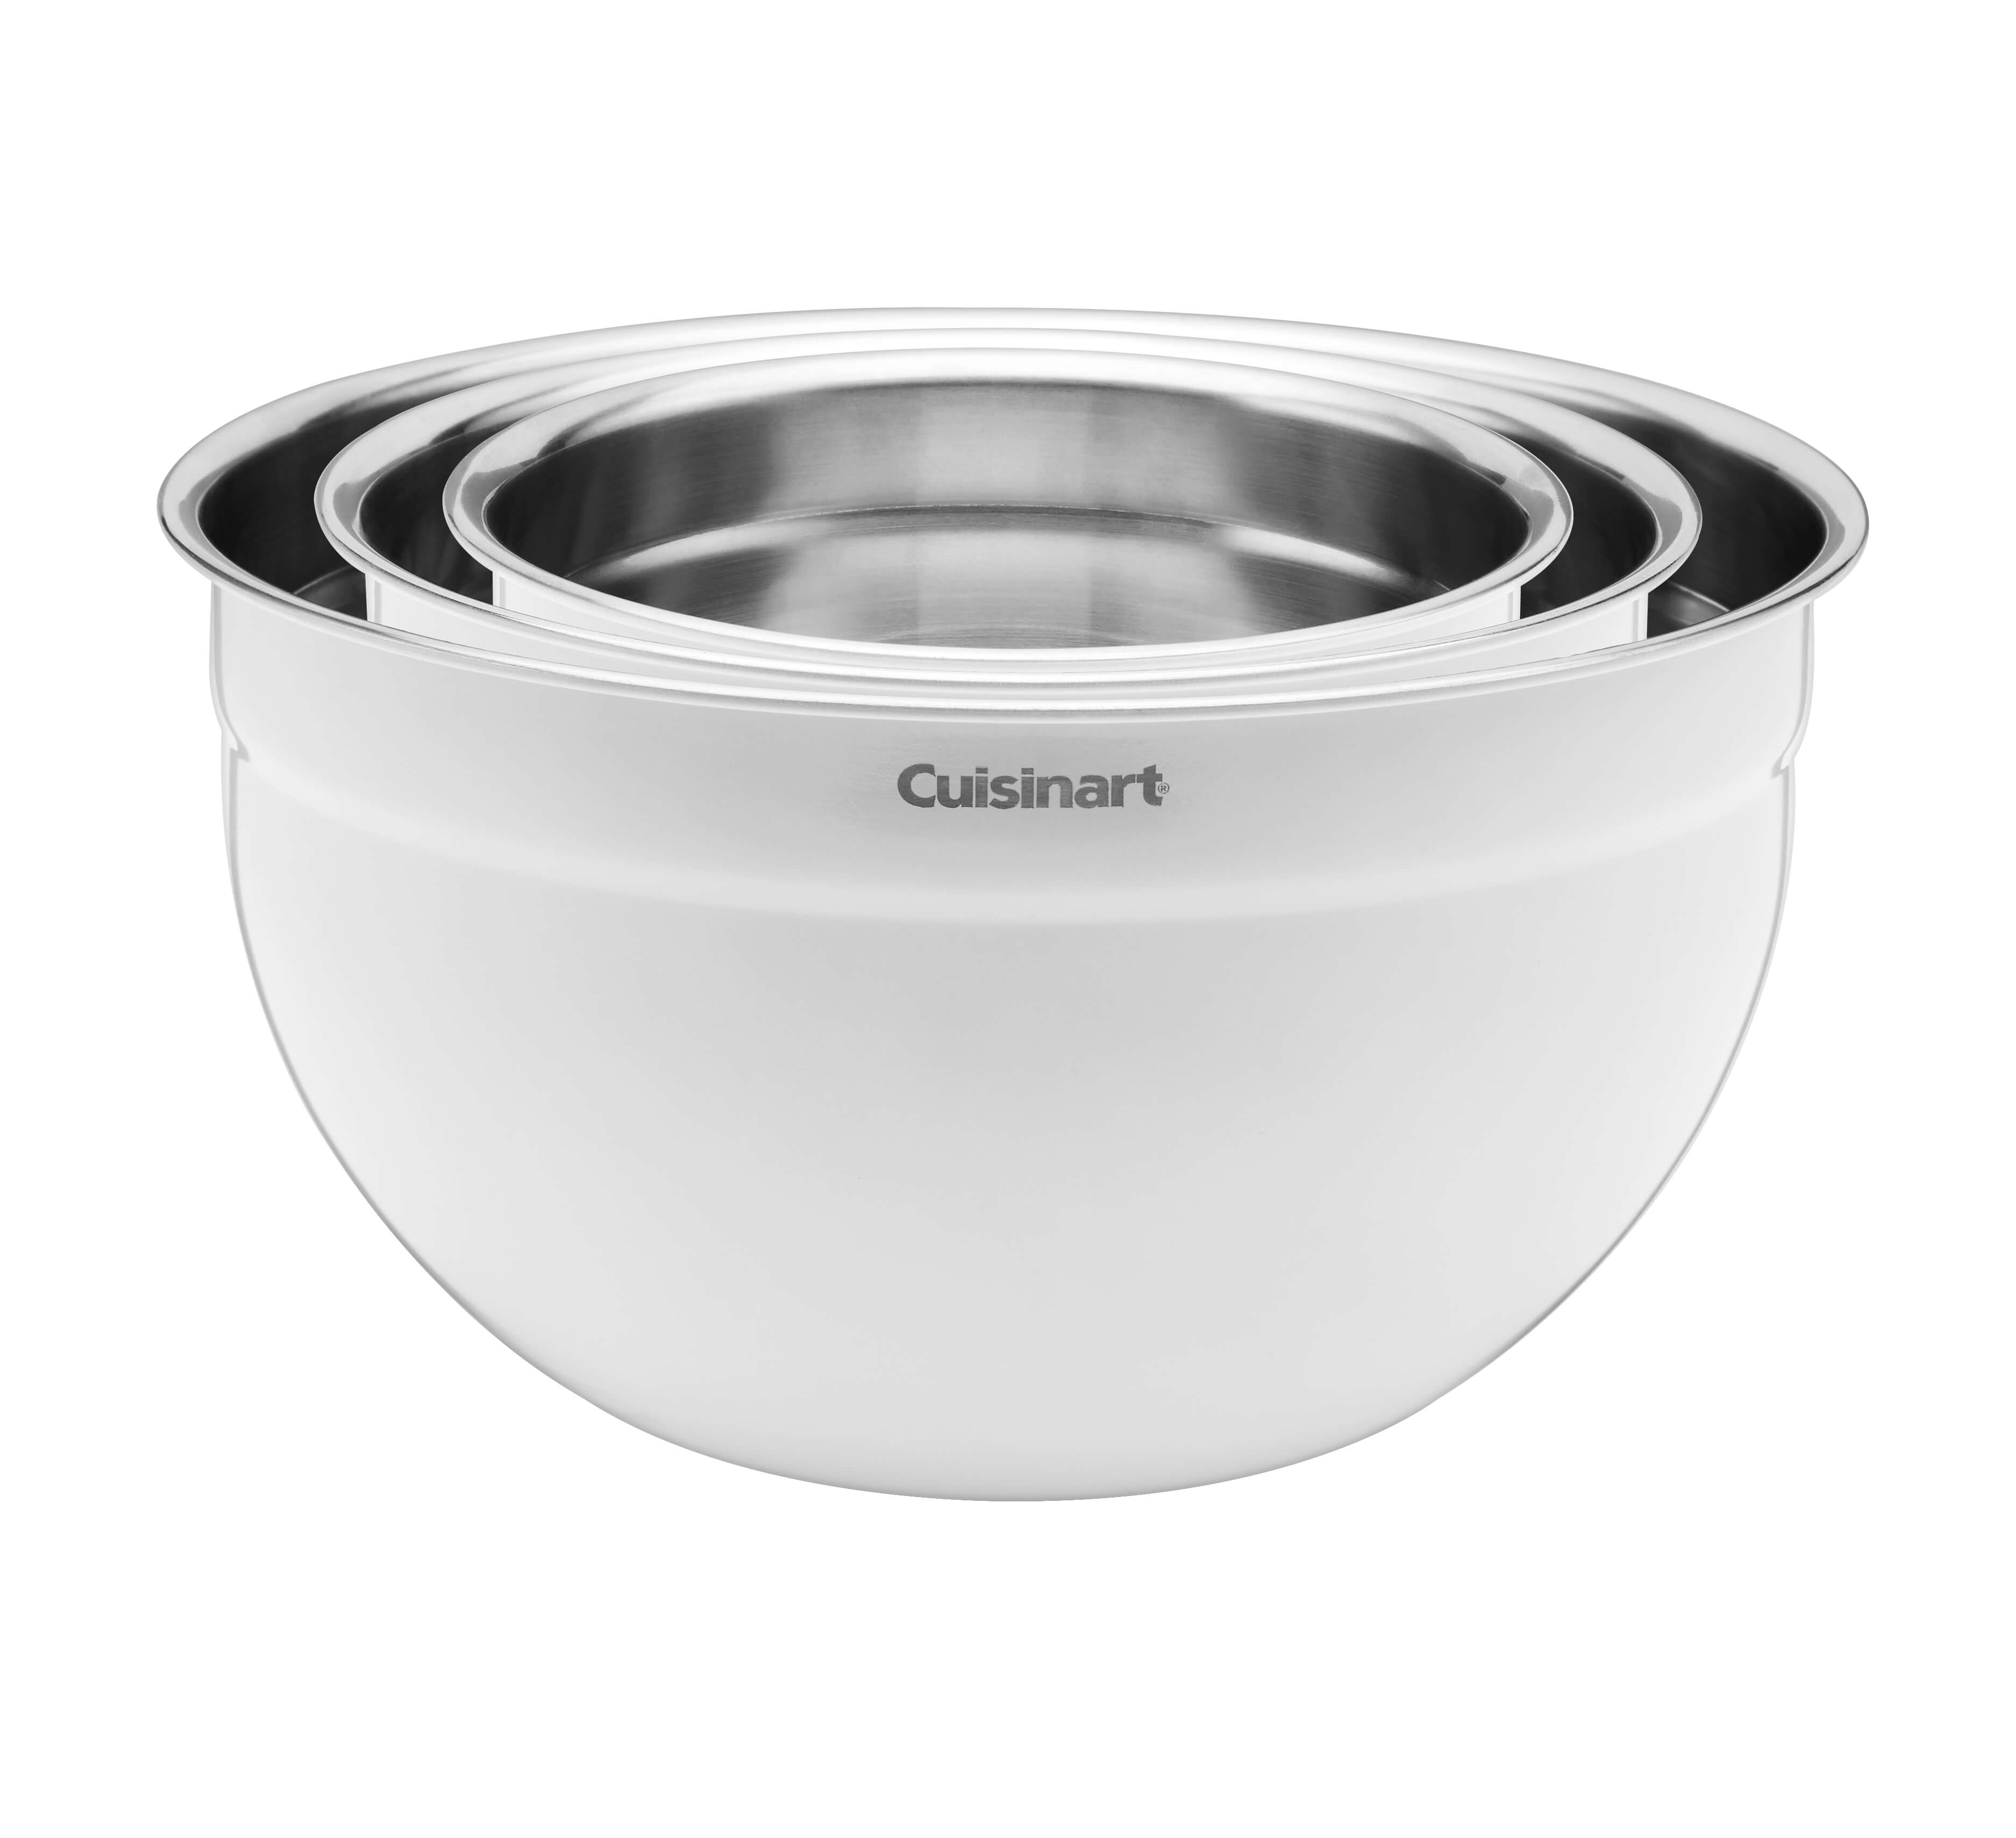 Discontinued Cuisinart Set of Three White Painted Mixing Bowls with Lids